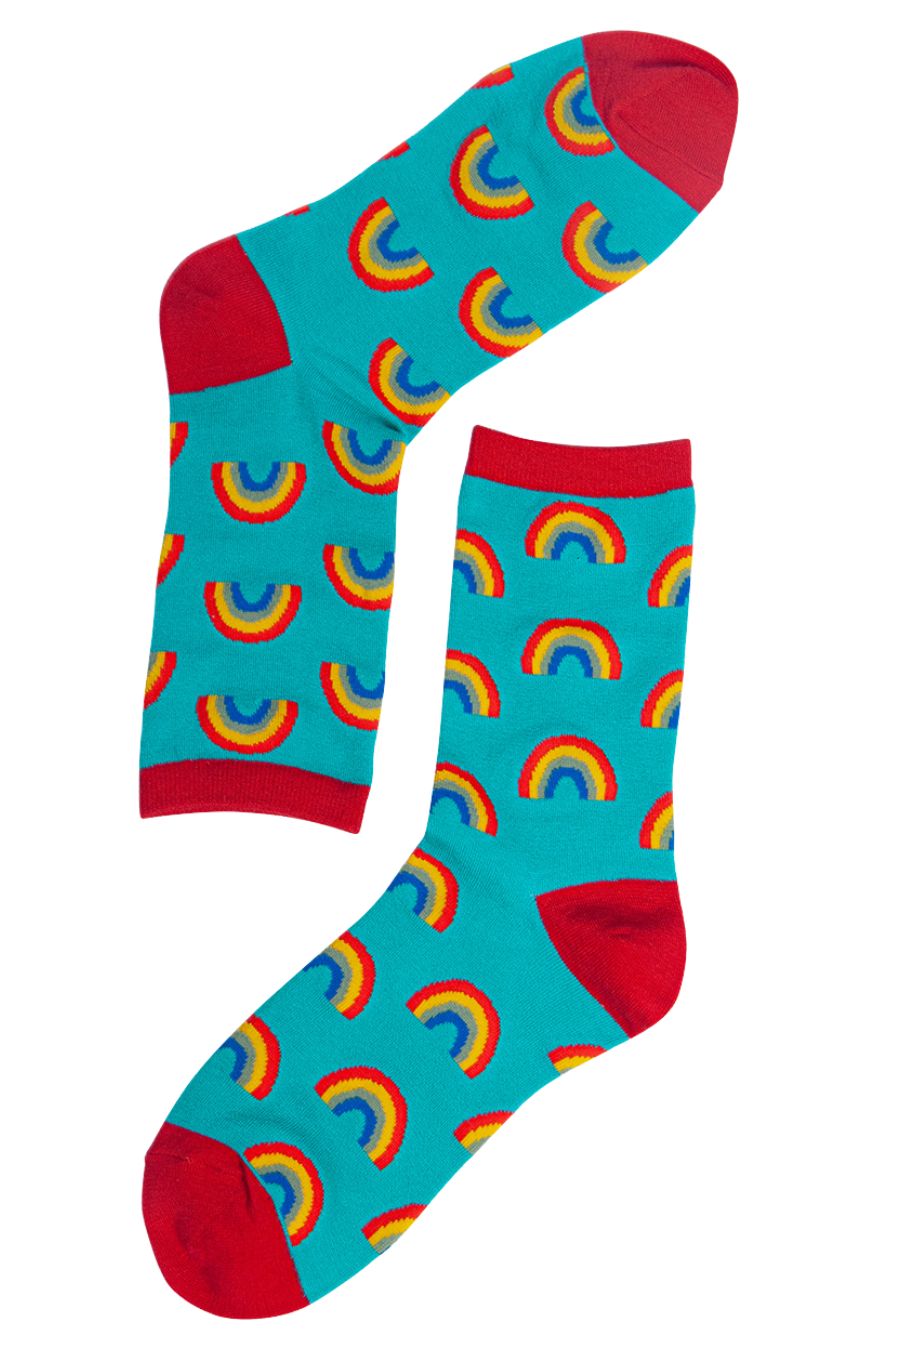 turquoise, red bamboo socks with an all over rainbow print